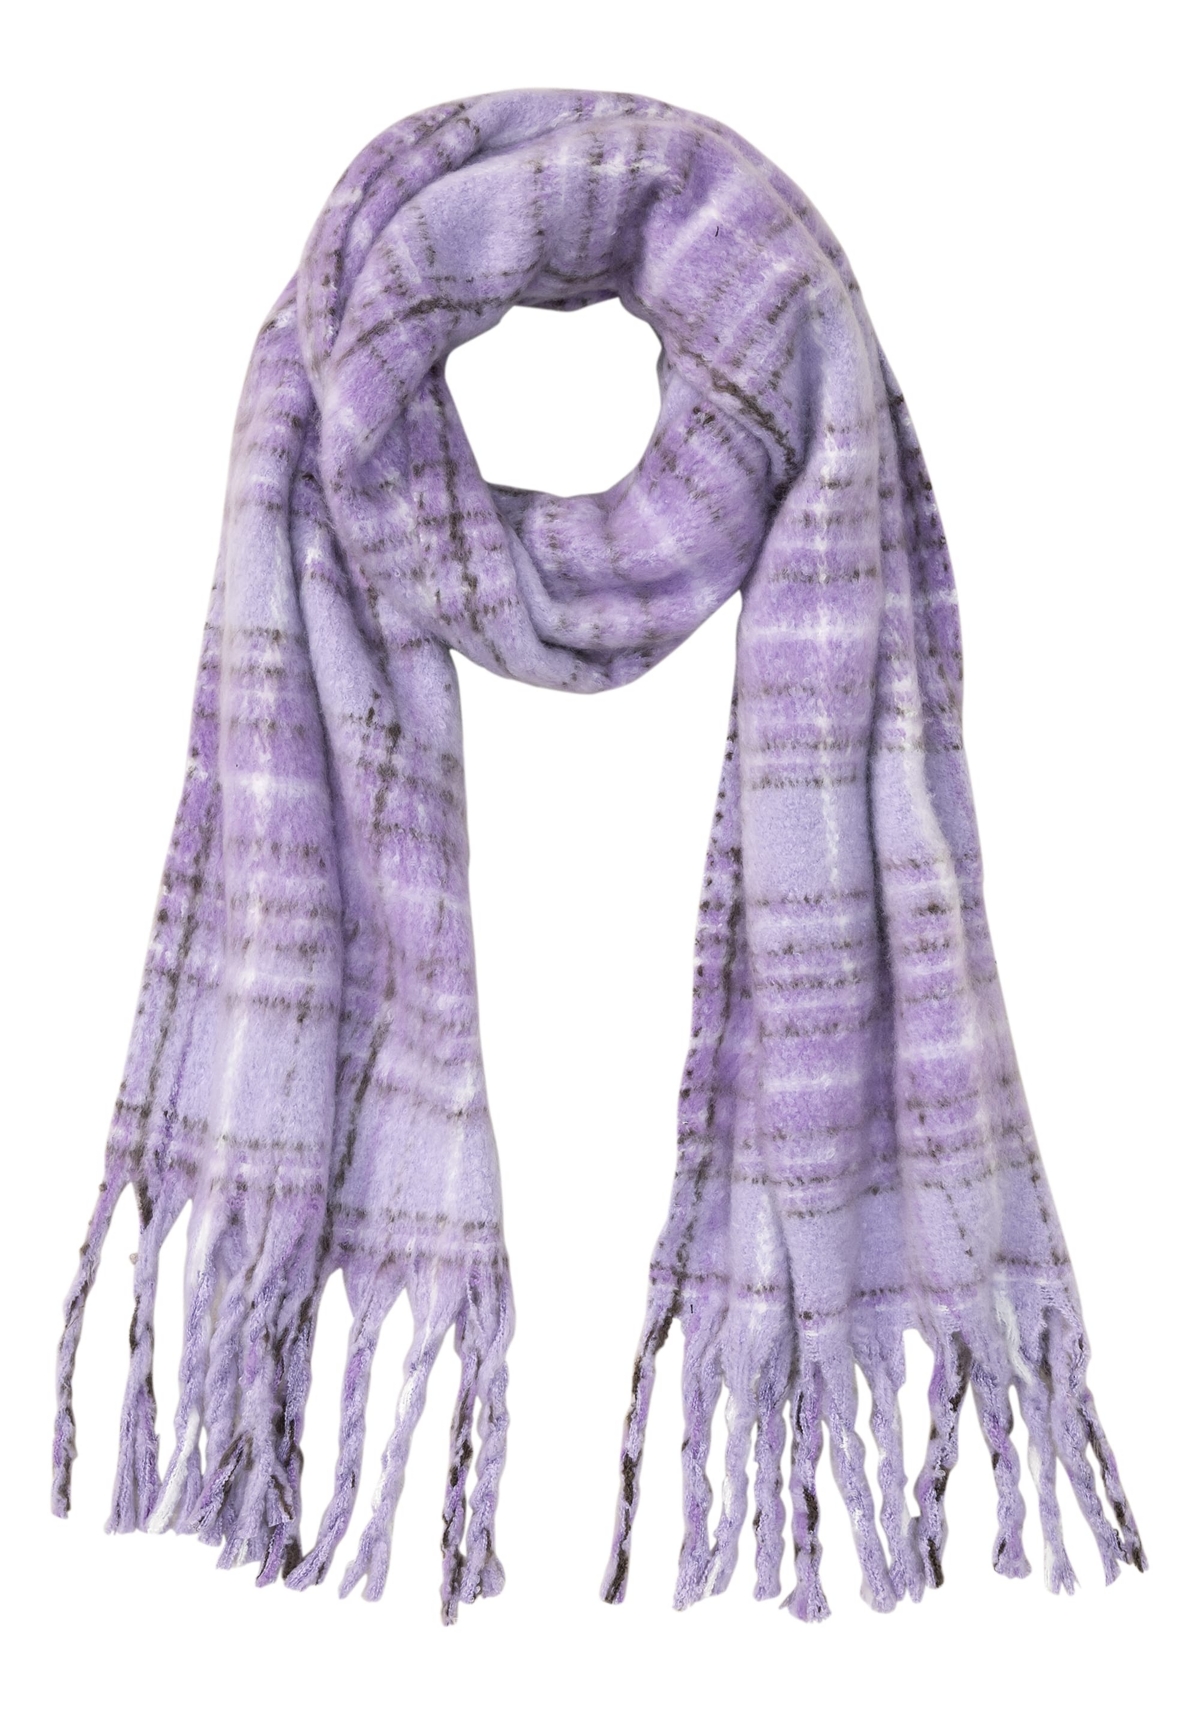 Plaid Blanket Scarf with Fringe Edge Trim - Frosted lilac